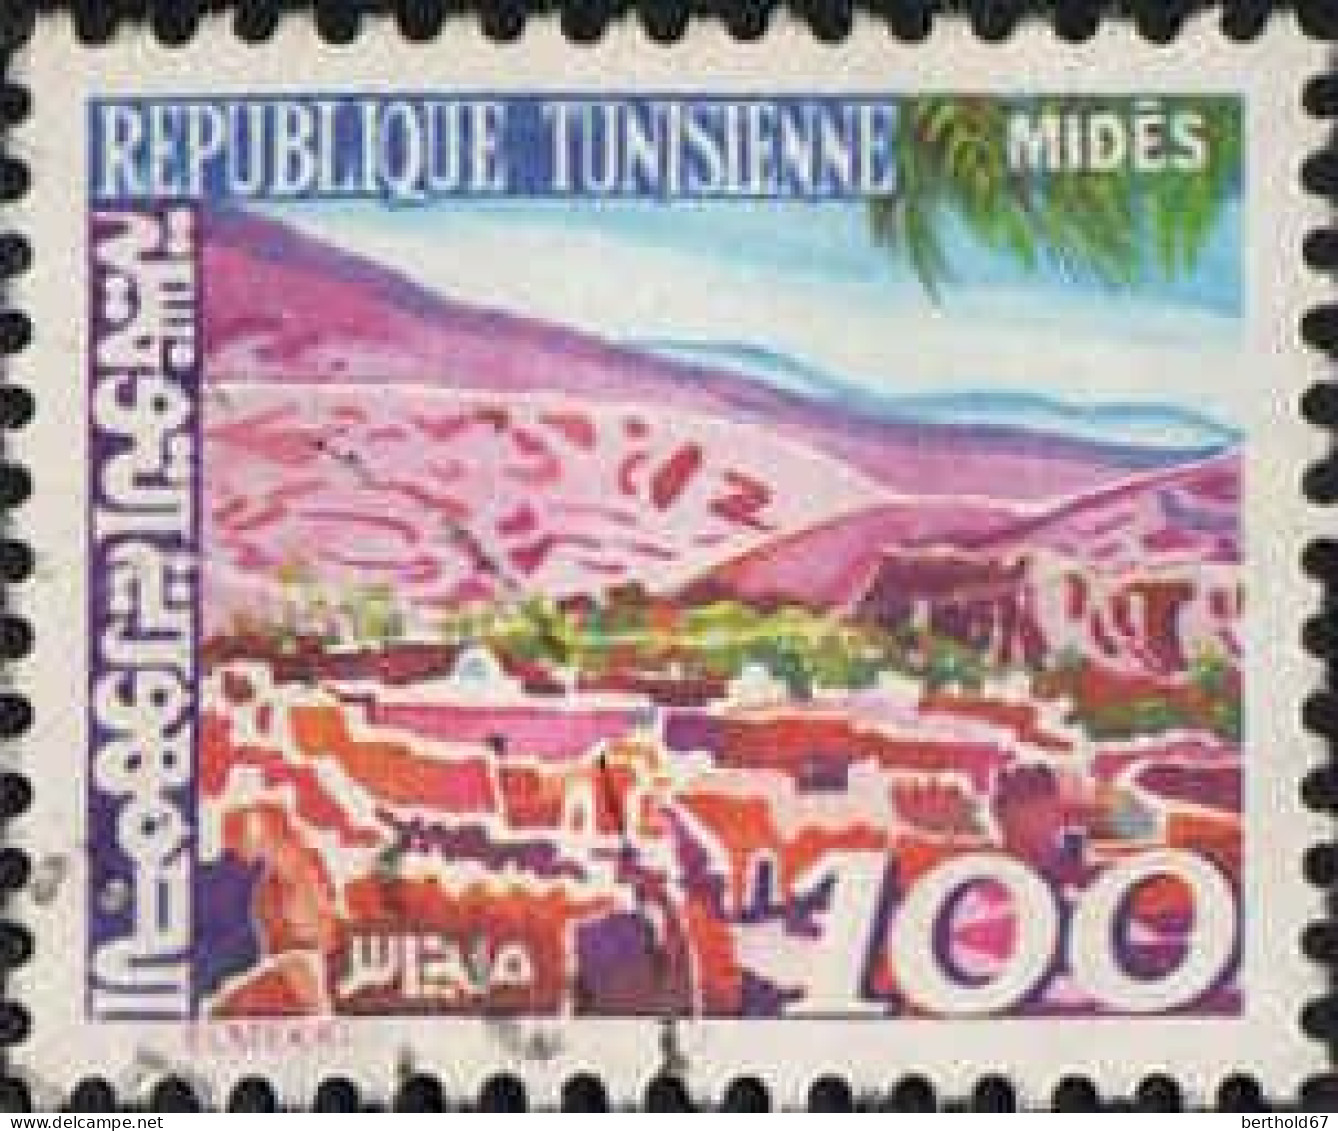 Tunisie (Rep) Poste Obl Yv: 889/890 Paysages Korbous & Mides (cachet Rond) - Tunisia